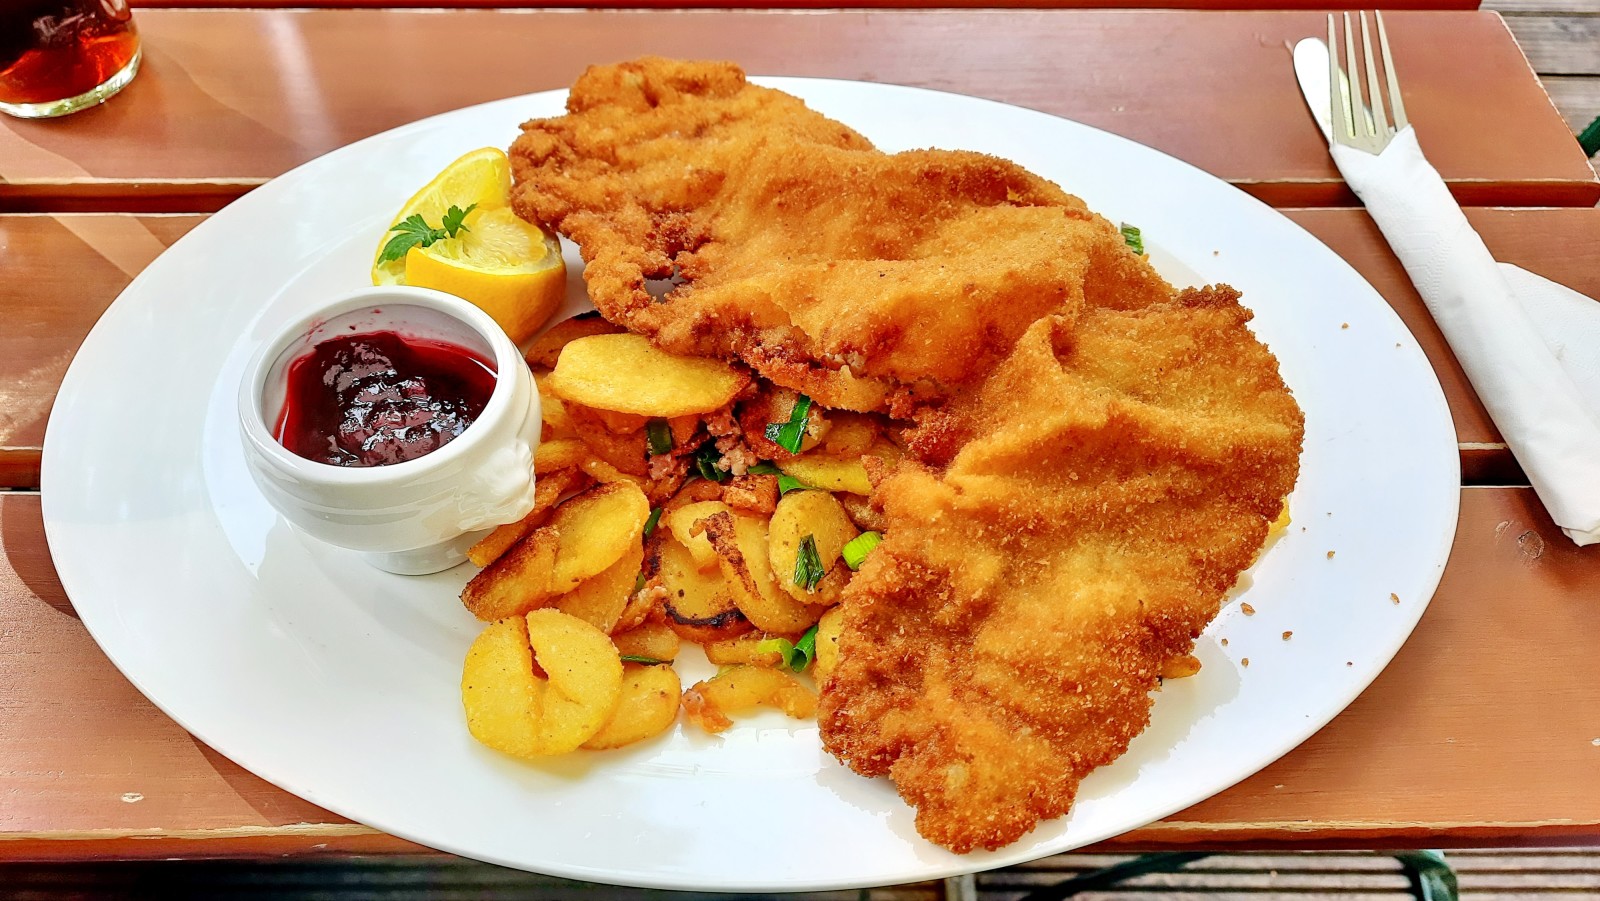 Schnitzel on a white plate with potatoes